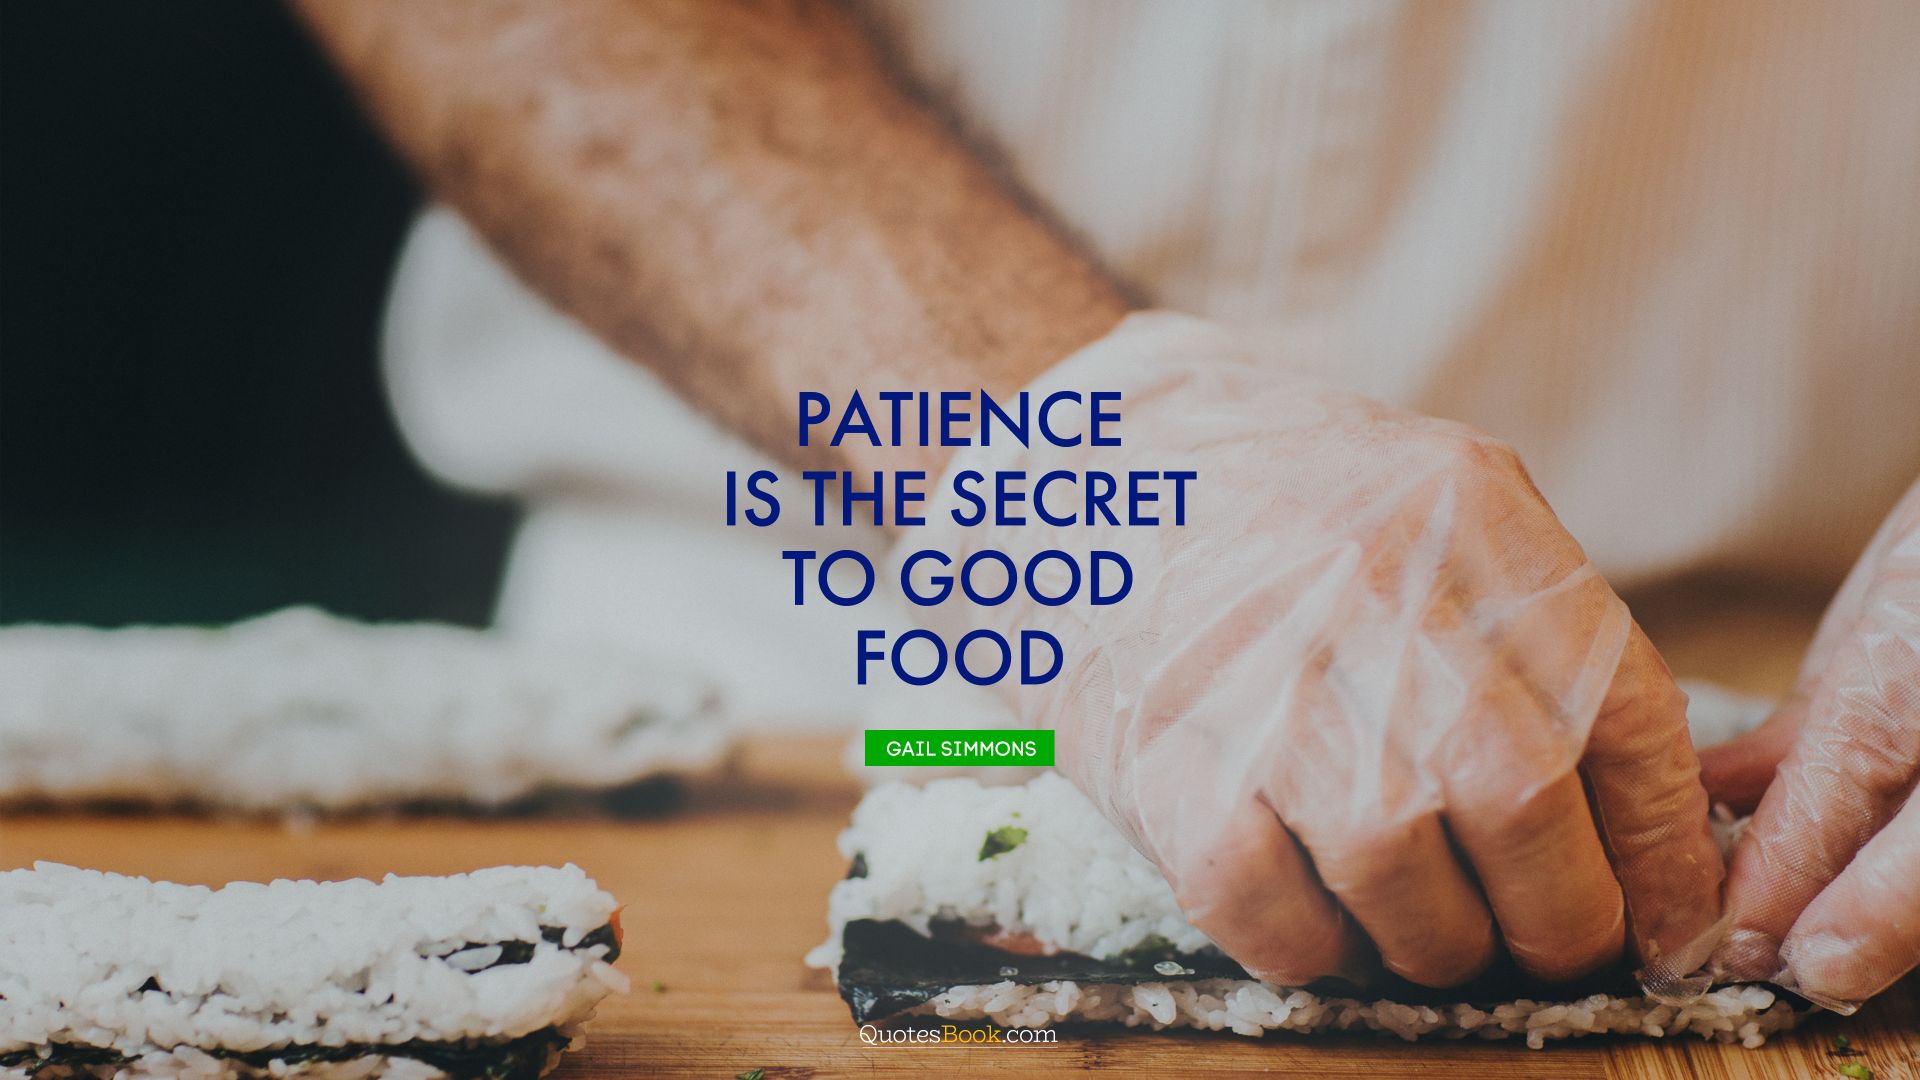 Patience is the secret to good food. - Quote by Gail Simmons